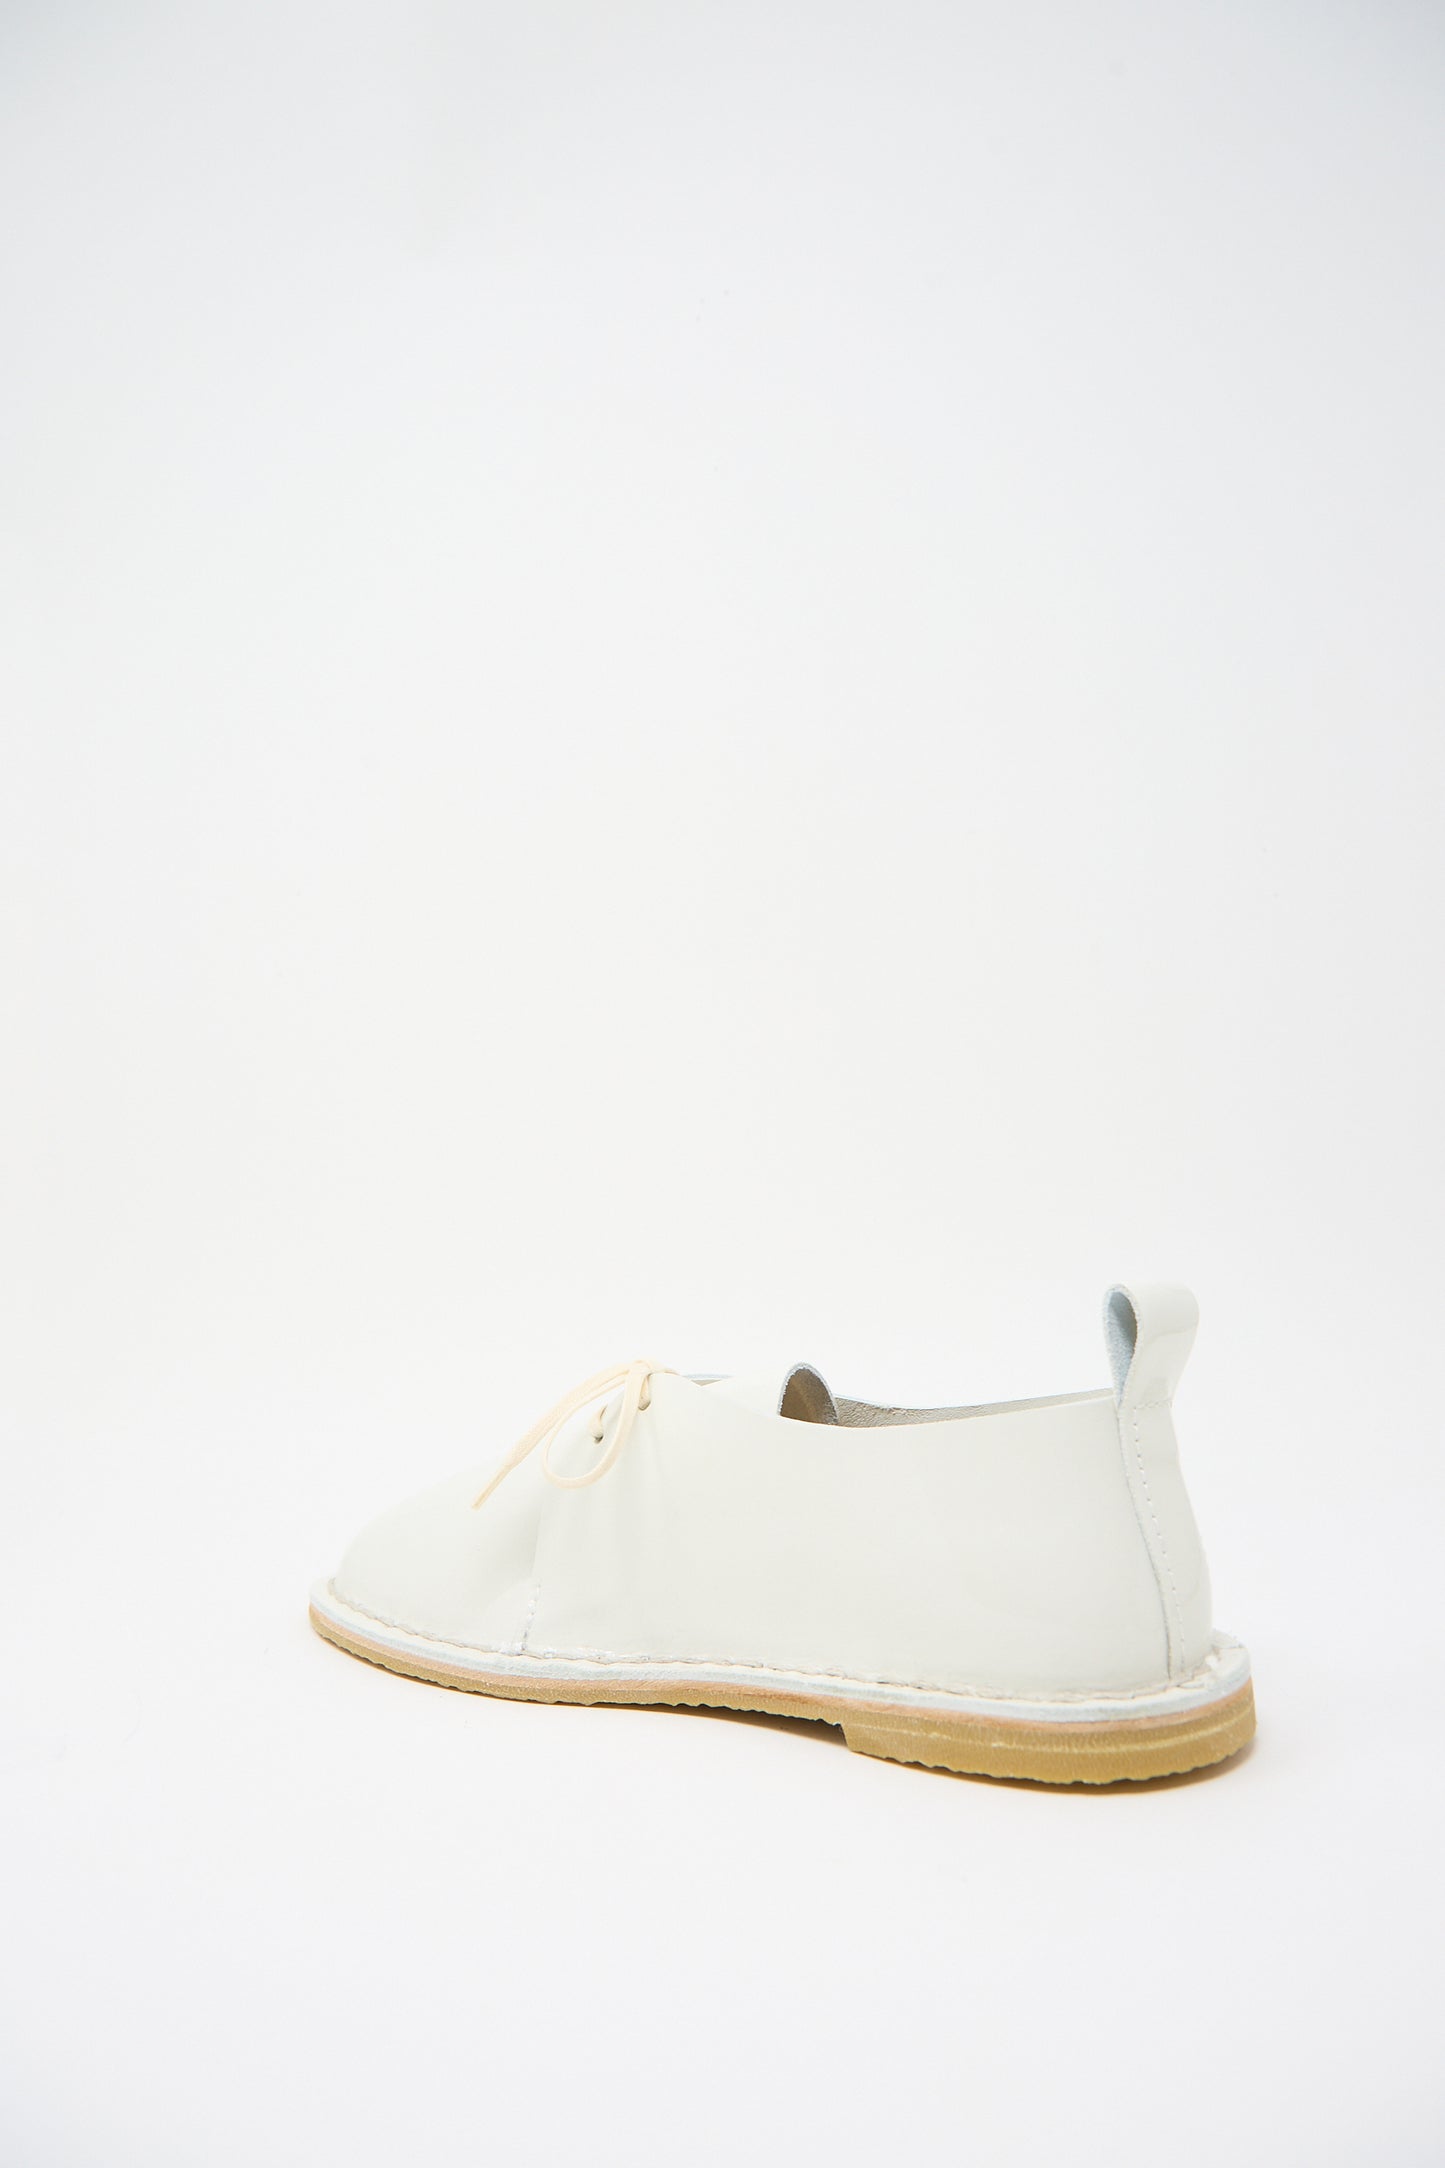 A single Steve Mono Patent Leather Derbie in White with a beige sole and laces, displayed against a plain white background, showcases its sleek design and sustainable craftsmanship.